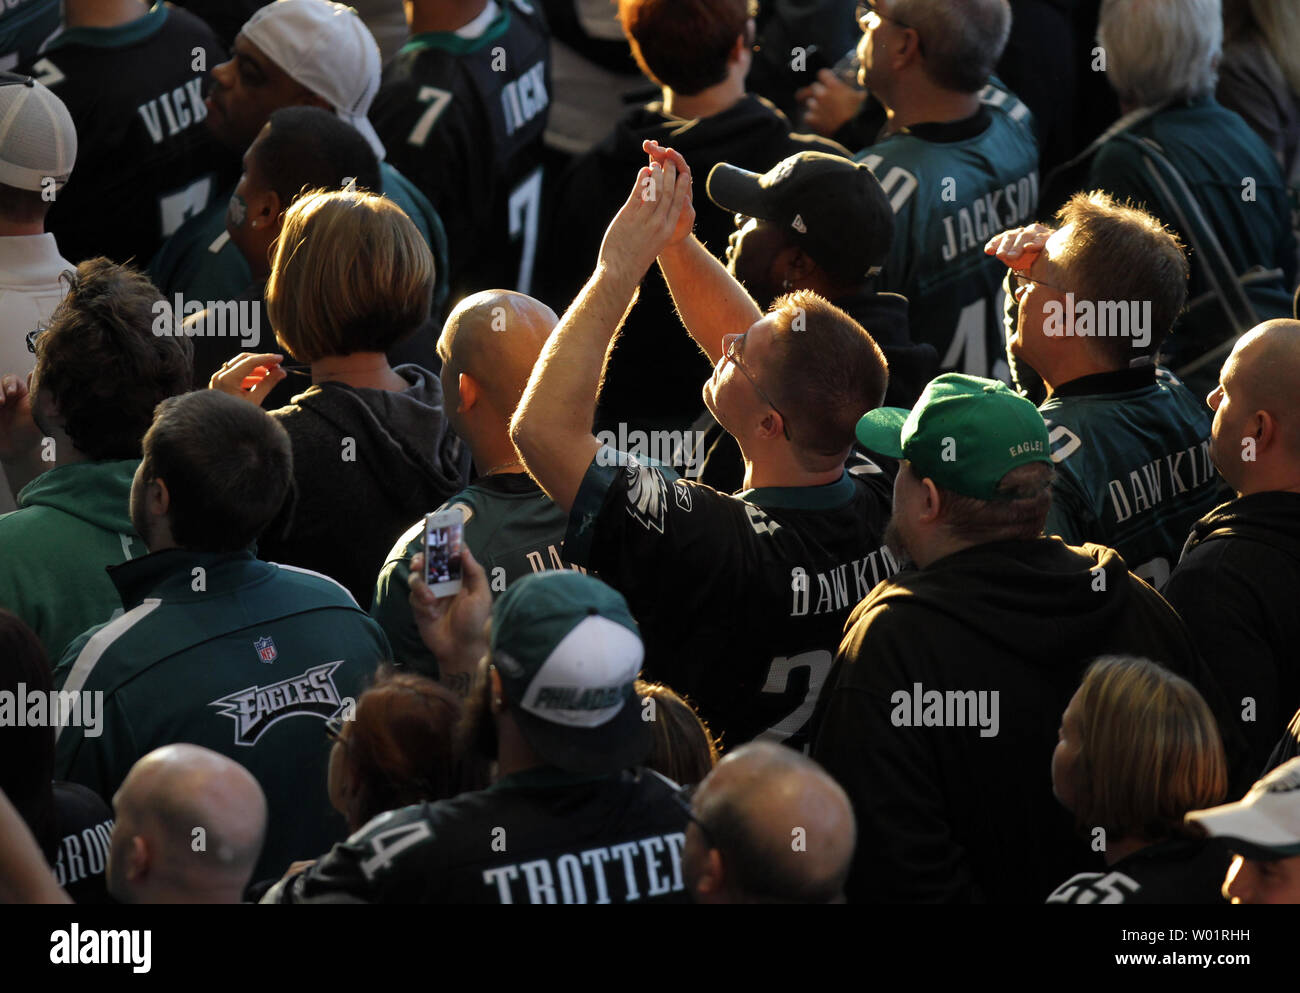 Fans strain to get a glimpse of former Philadelphia Eagles player Brian Dawkins as his number is retired during a ceremony at Lincoln Financial Field in Philadelphia on September 30, 2012.  UPI/Laurence Kesterson Stock Photo